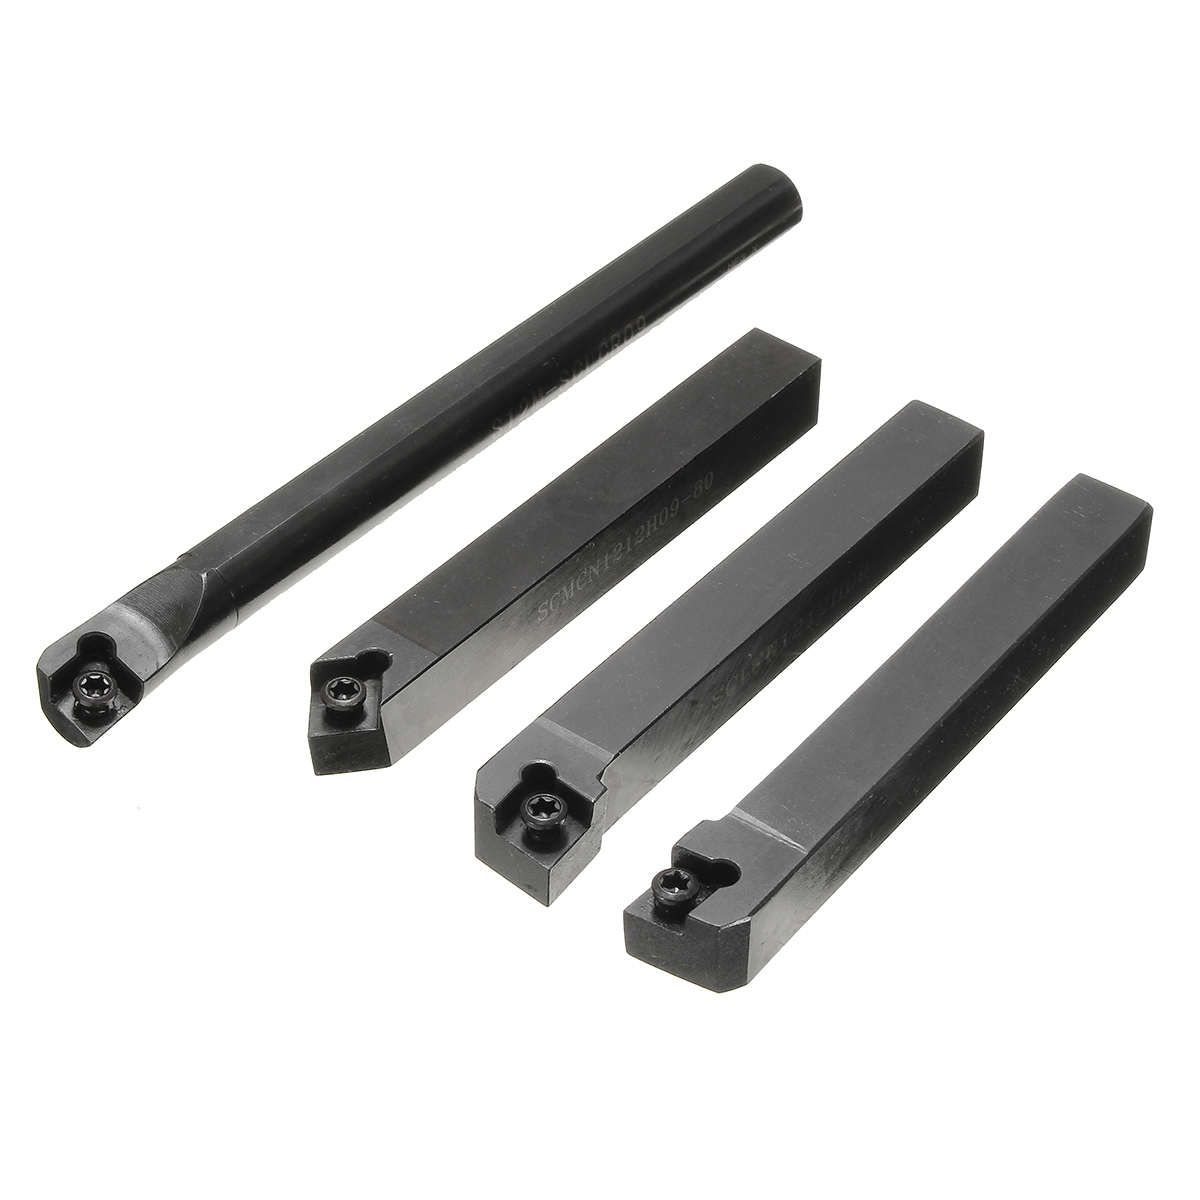 4pcs-12mm-Shank-External-Turning-Tool-with-CCMT09T304-Carbide-Inserts-CNC-Machine-Tools-Turning-1615867-6